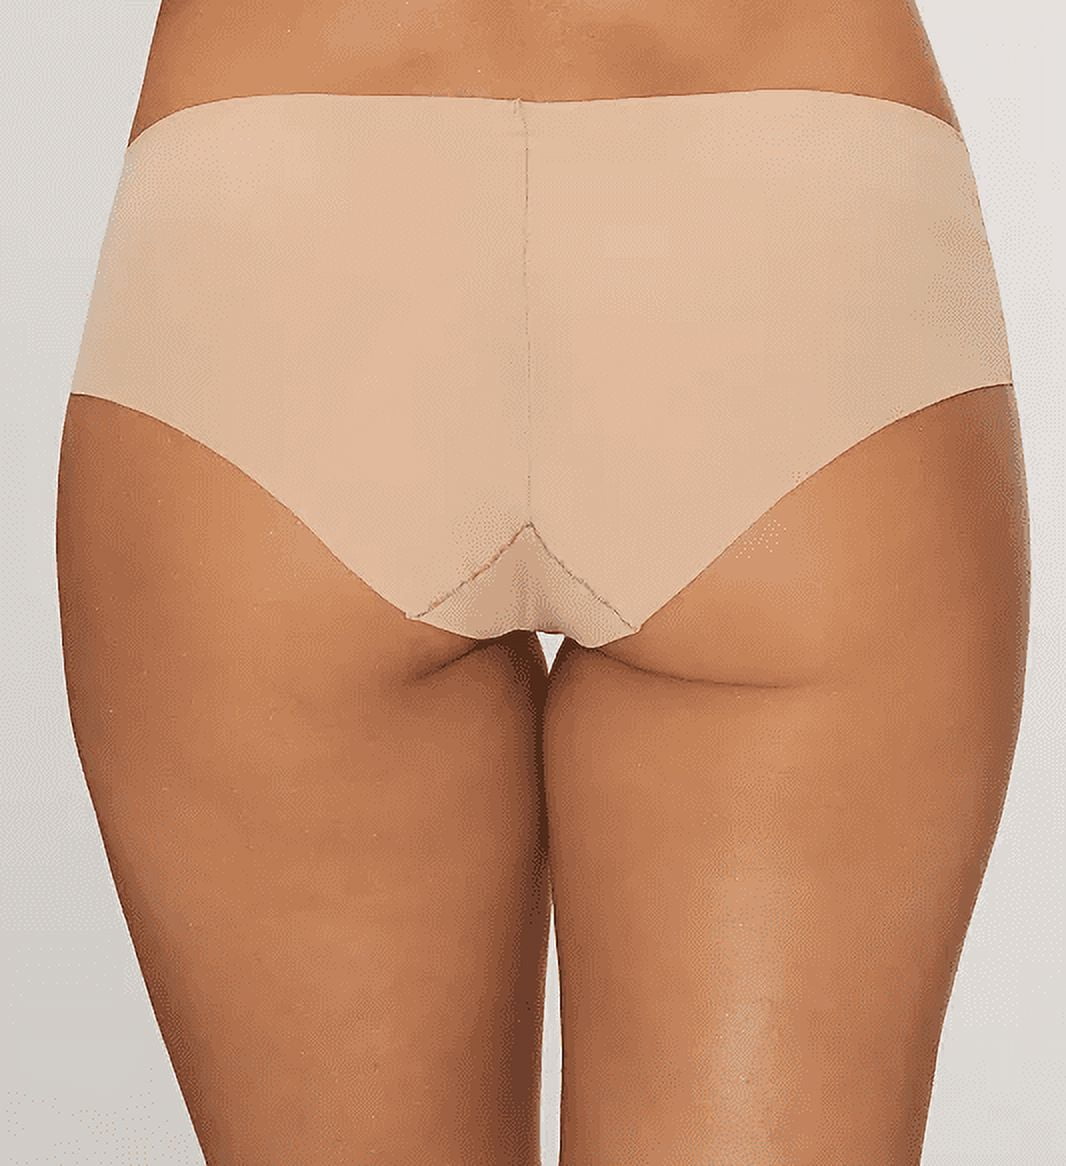 Buy Calvin Klein Women's Invisibles Hipster Panty, Jet Grey, L at